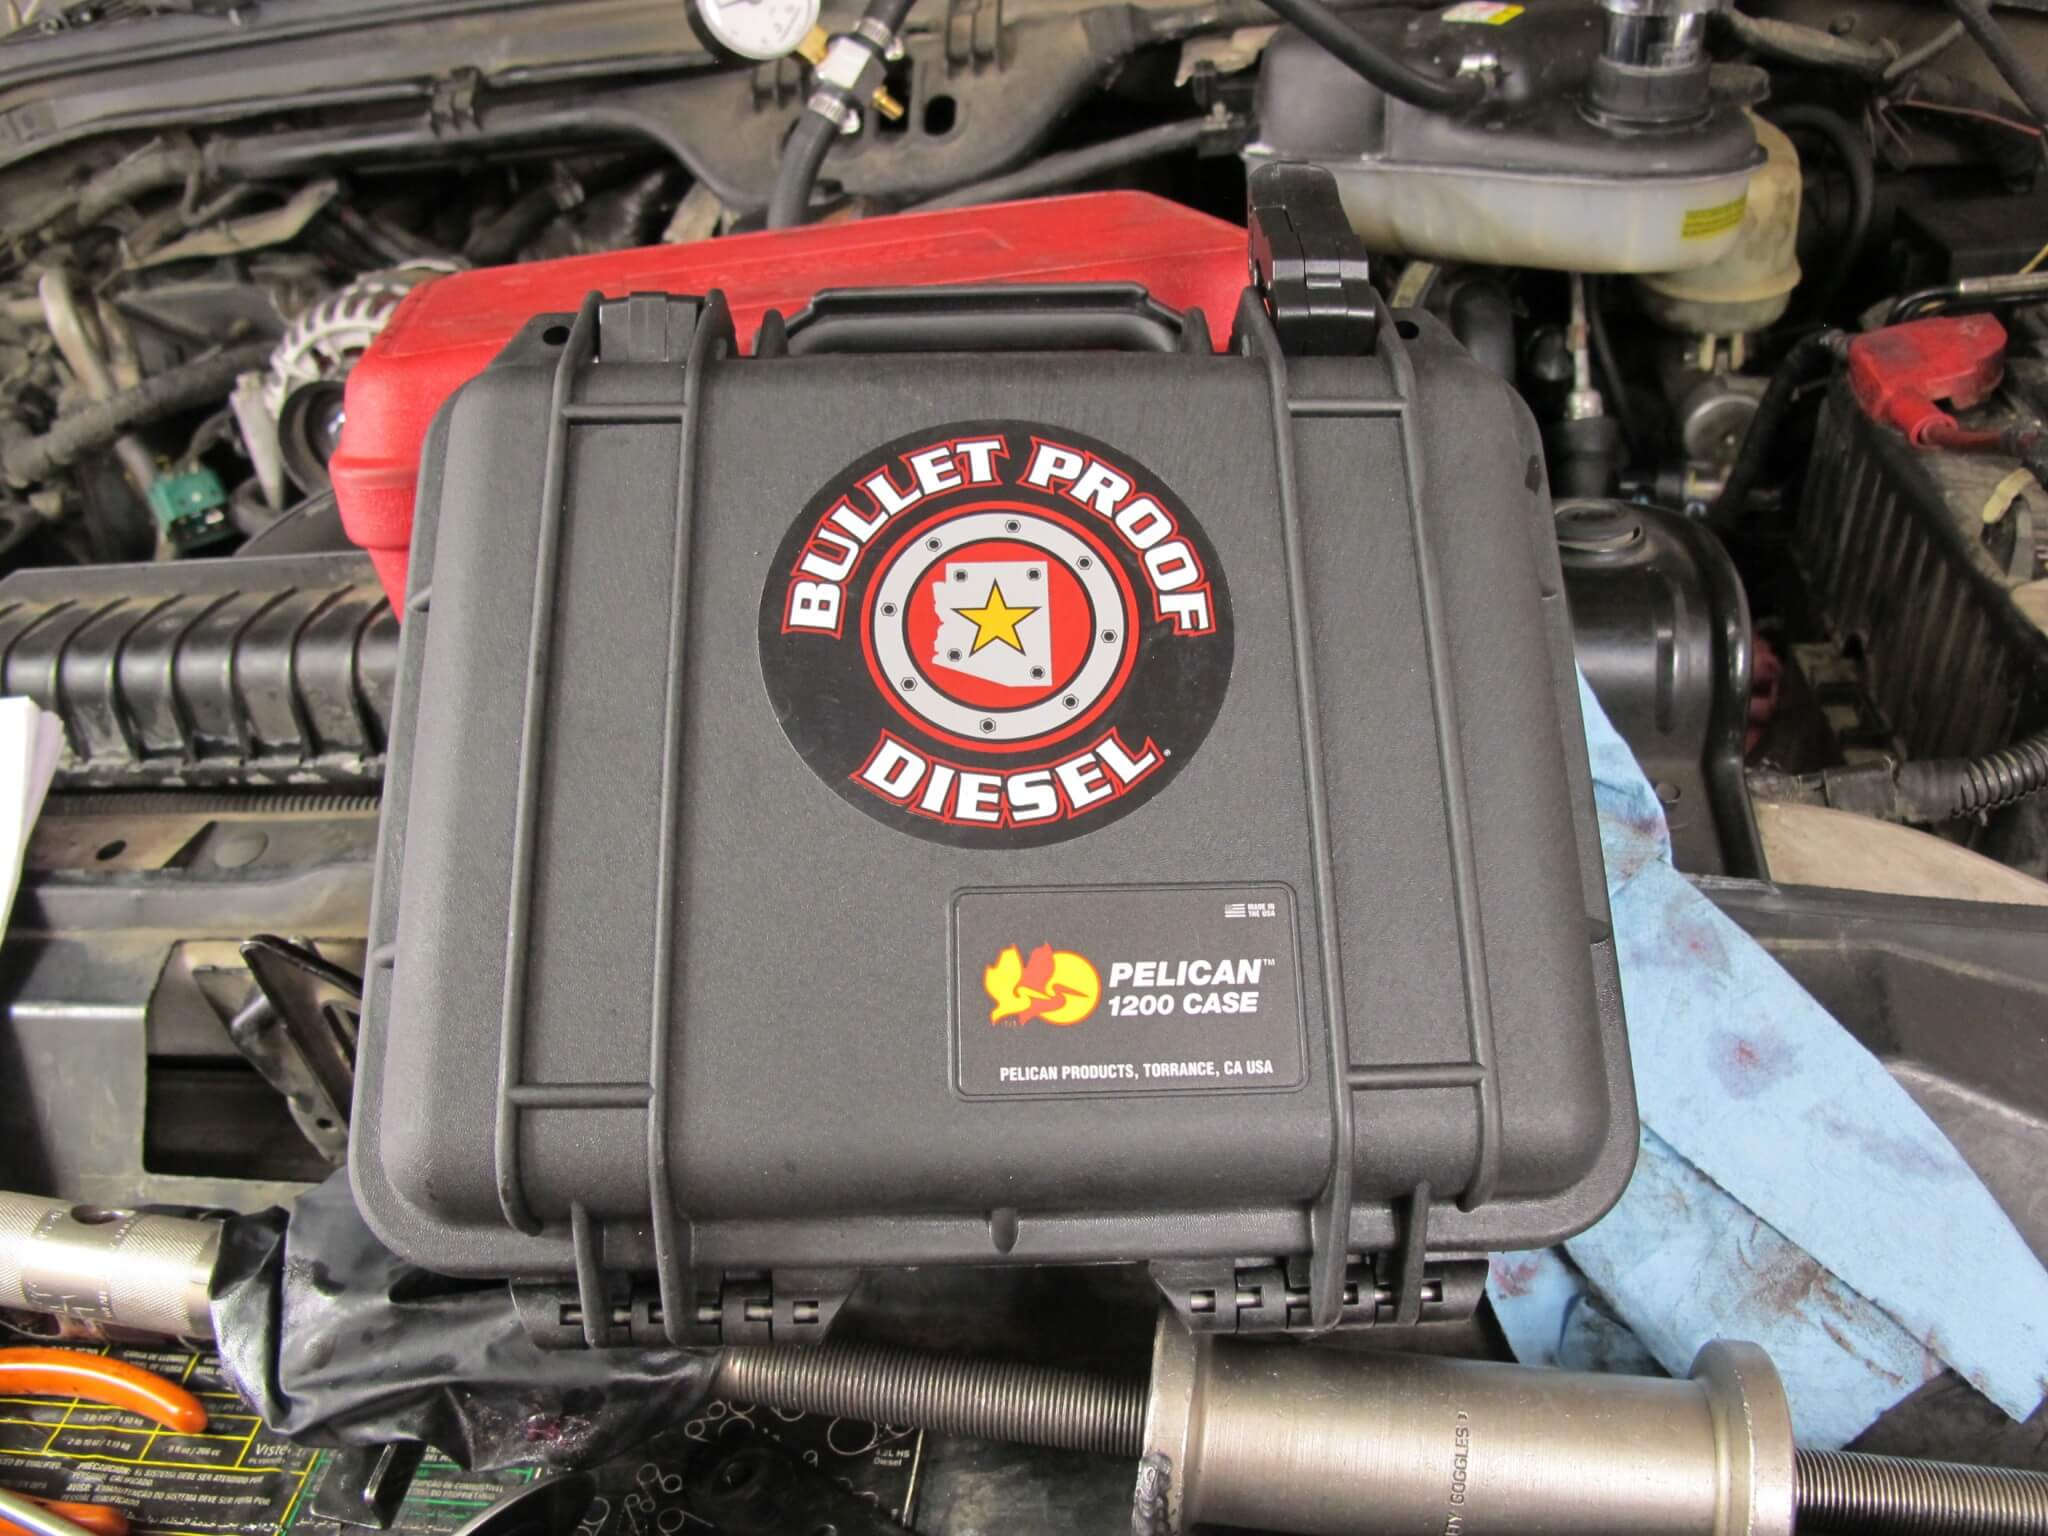 18. The Bullet Proof Diesel repair kit comes in a high-impact case for storage. 